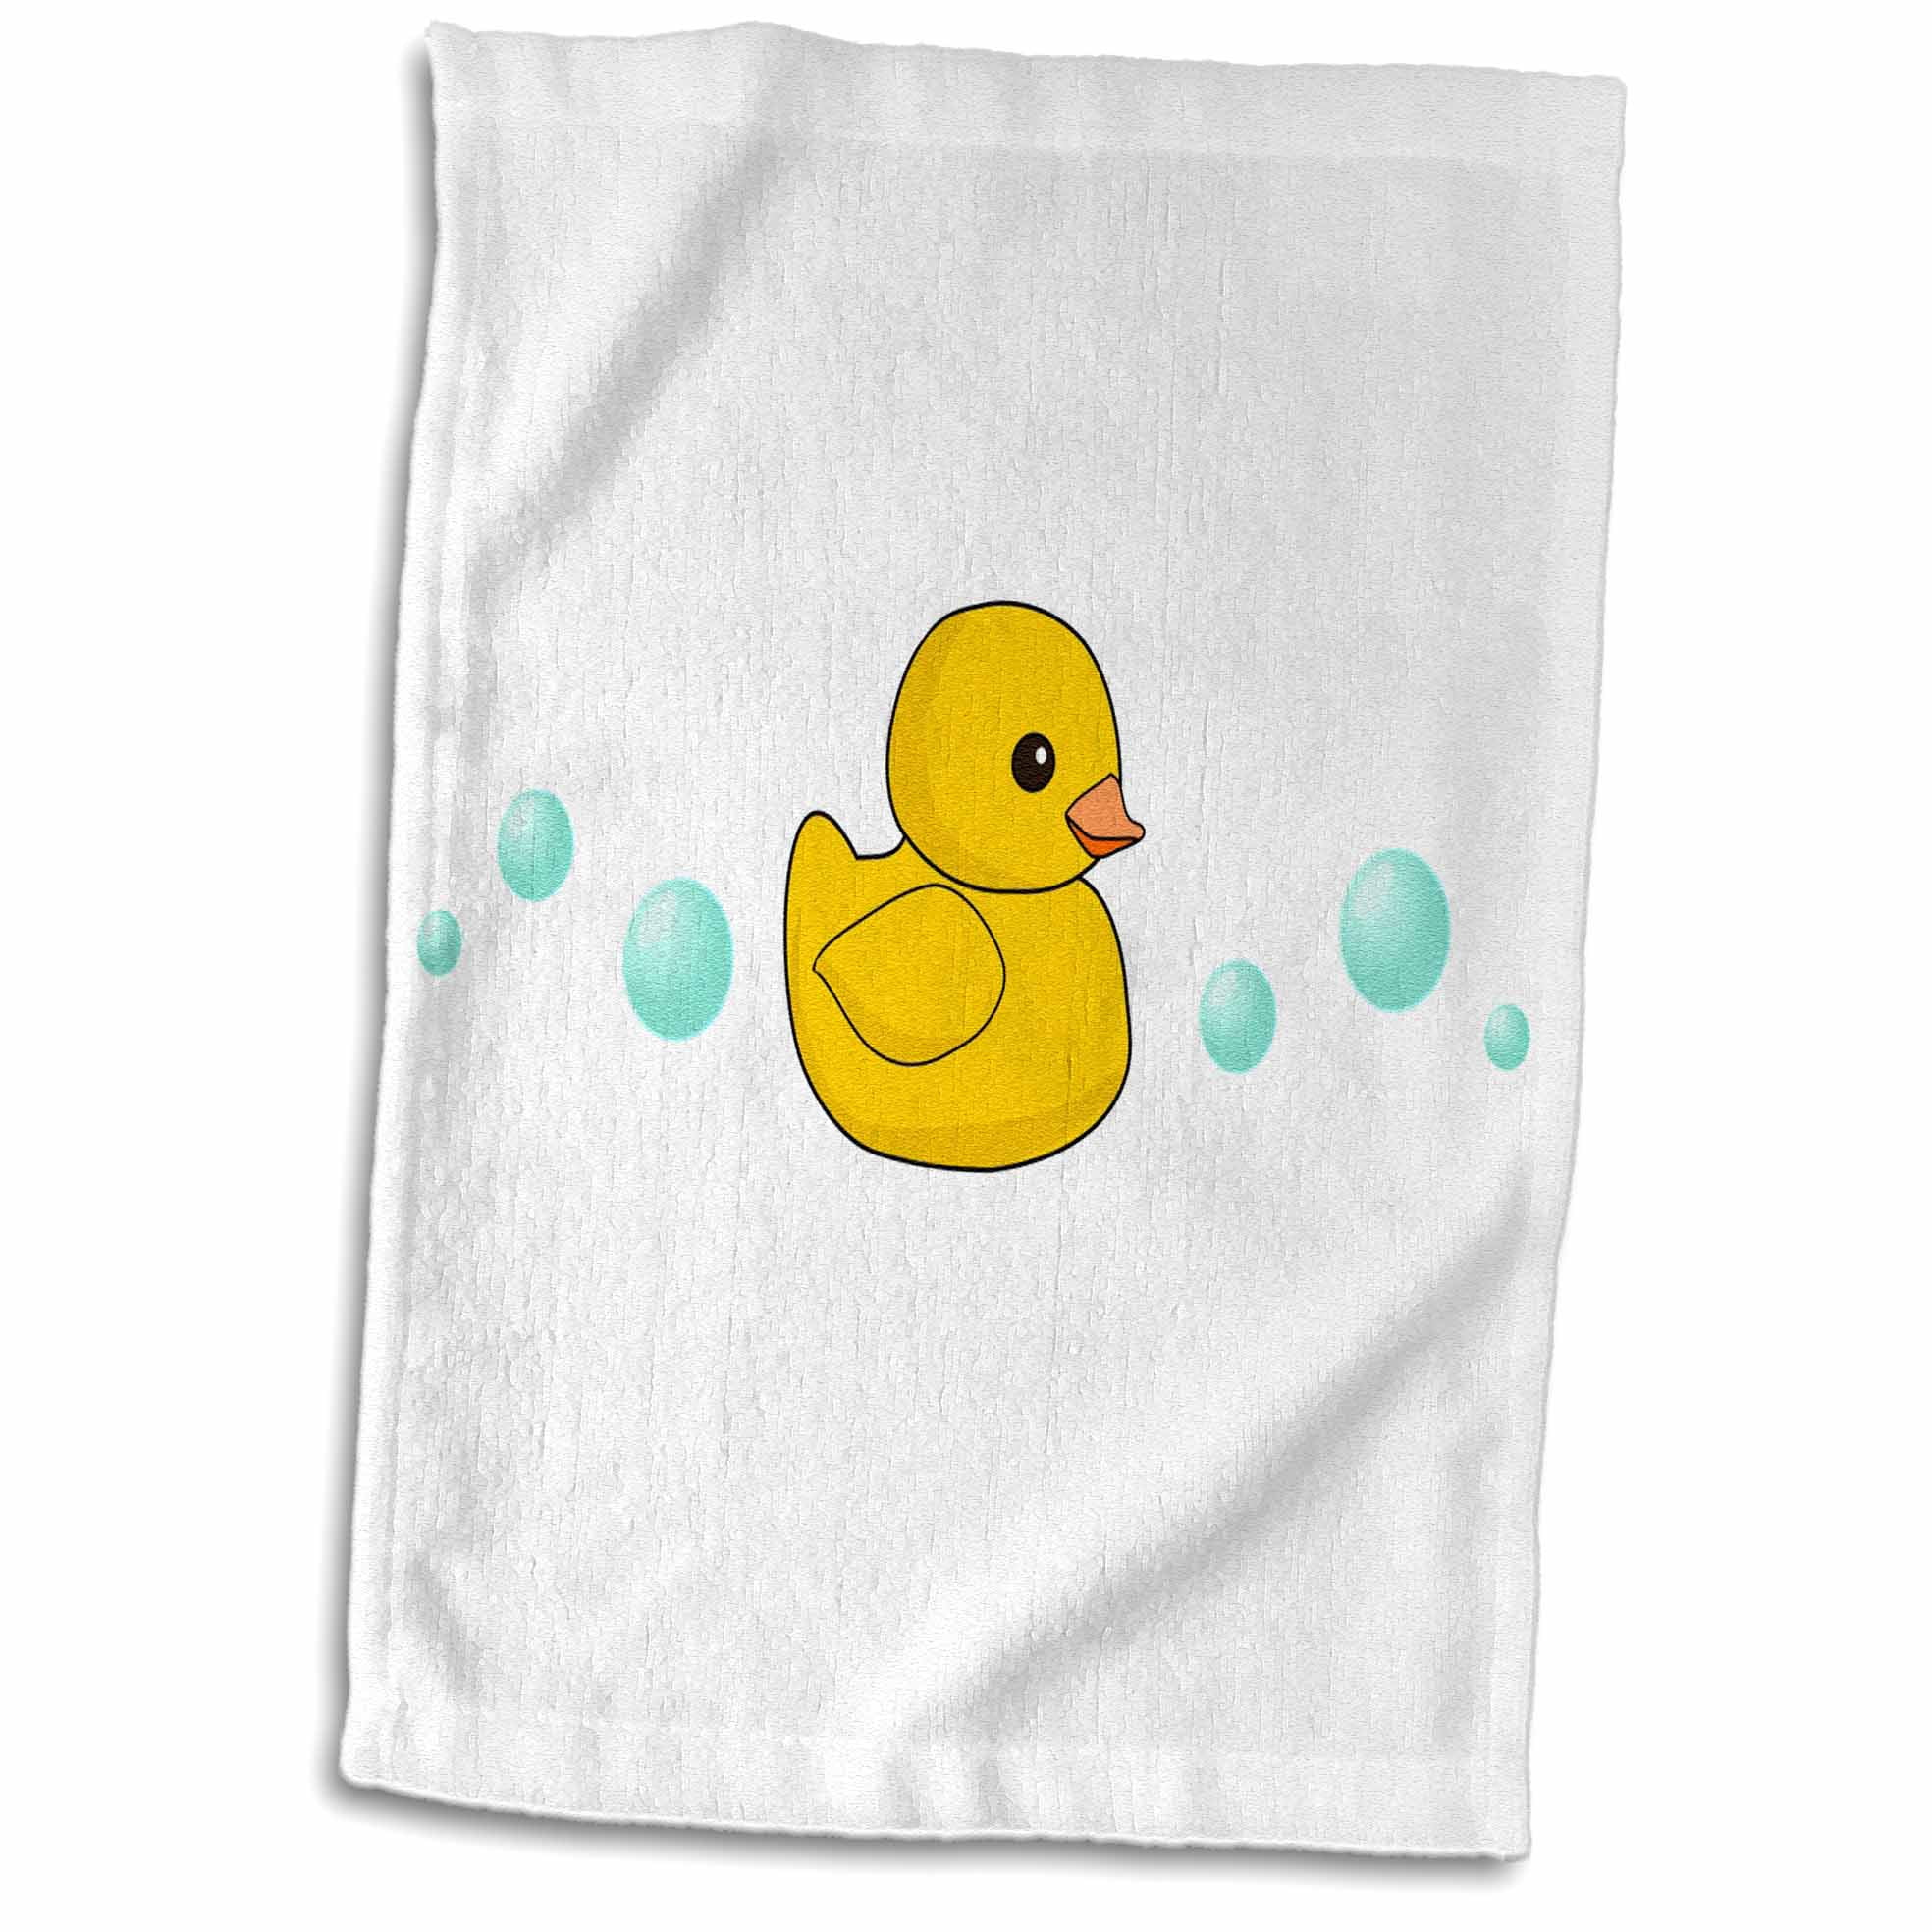 5-Inch 3dRose ph_112950_1 Cute Yellow Rubber Ducky Cartoon with Soap Bubbles-Kawaii Duckie on White-Adorable Sweet Duck-Tile Pen Holder